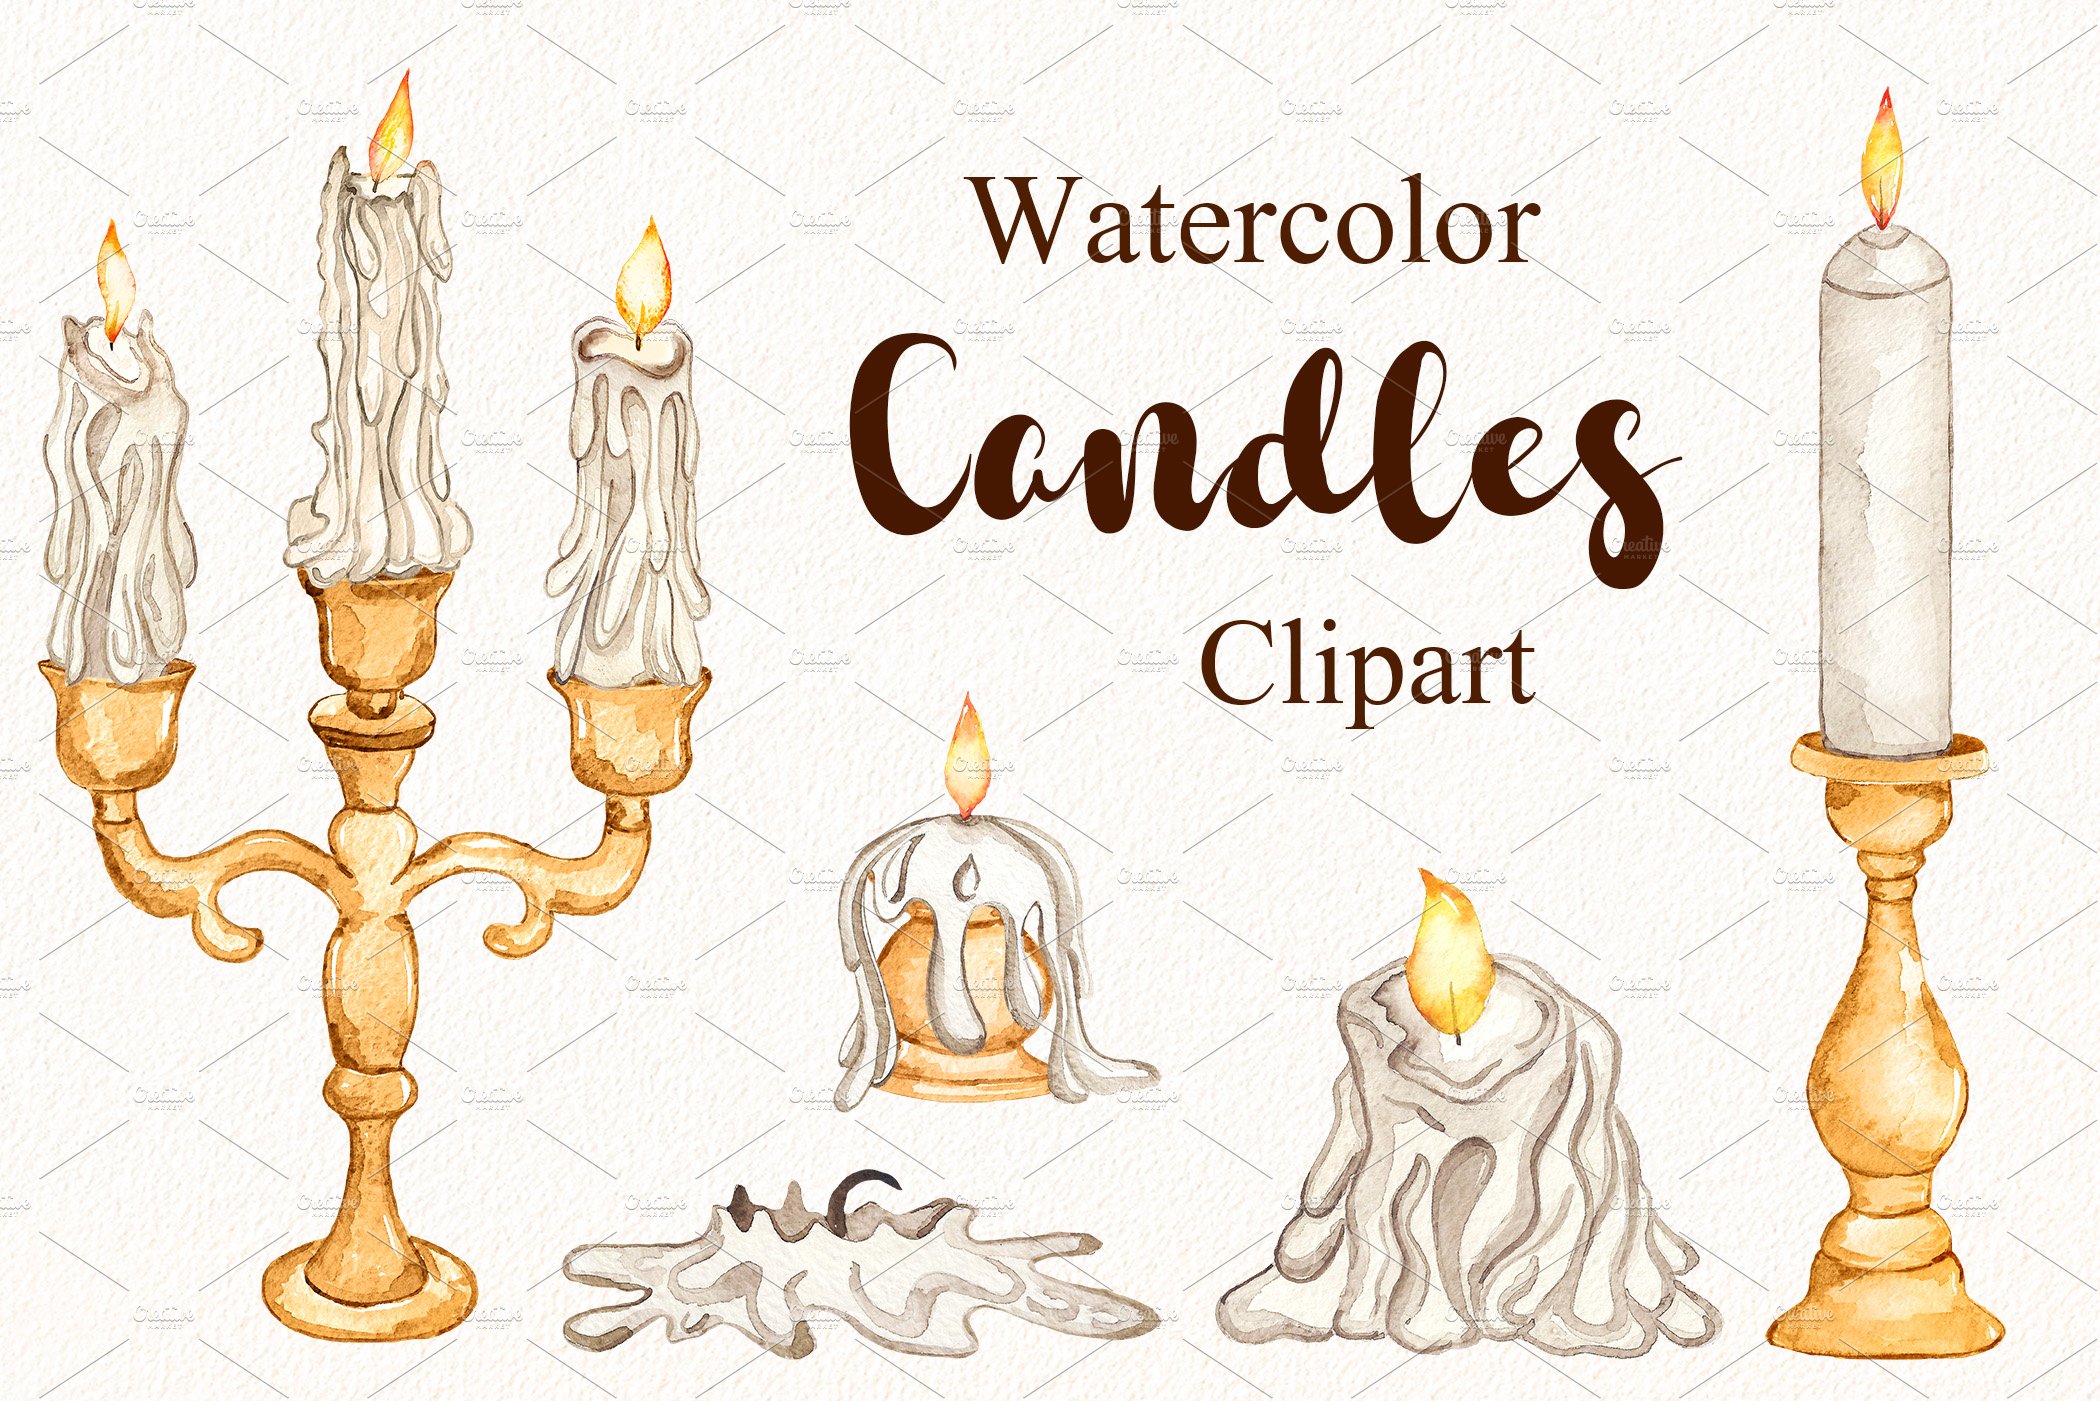 Watercolor candles clipart cover image.